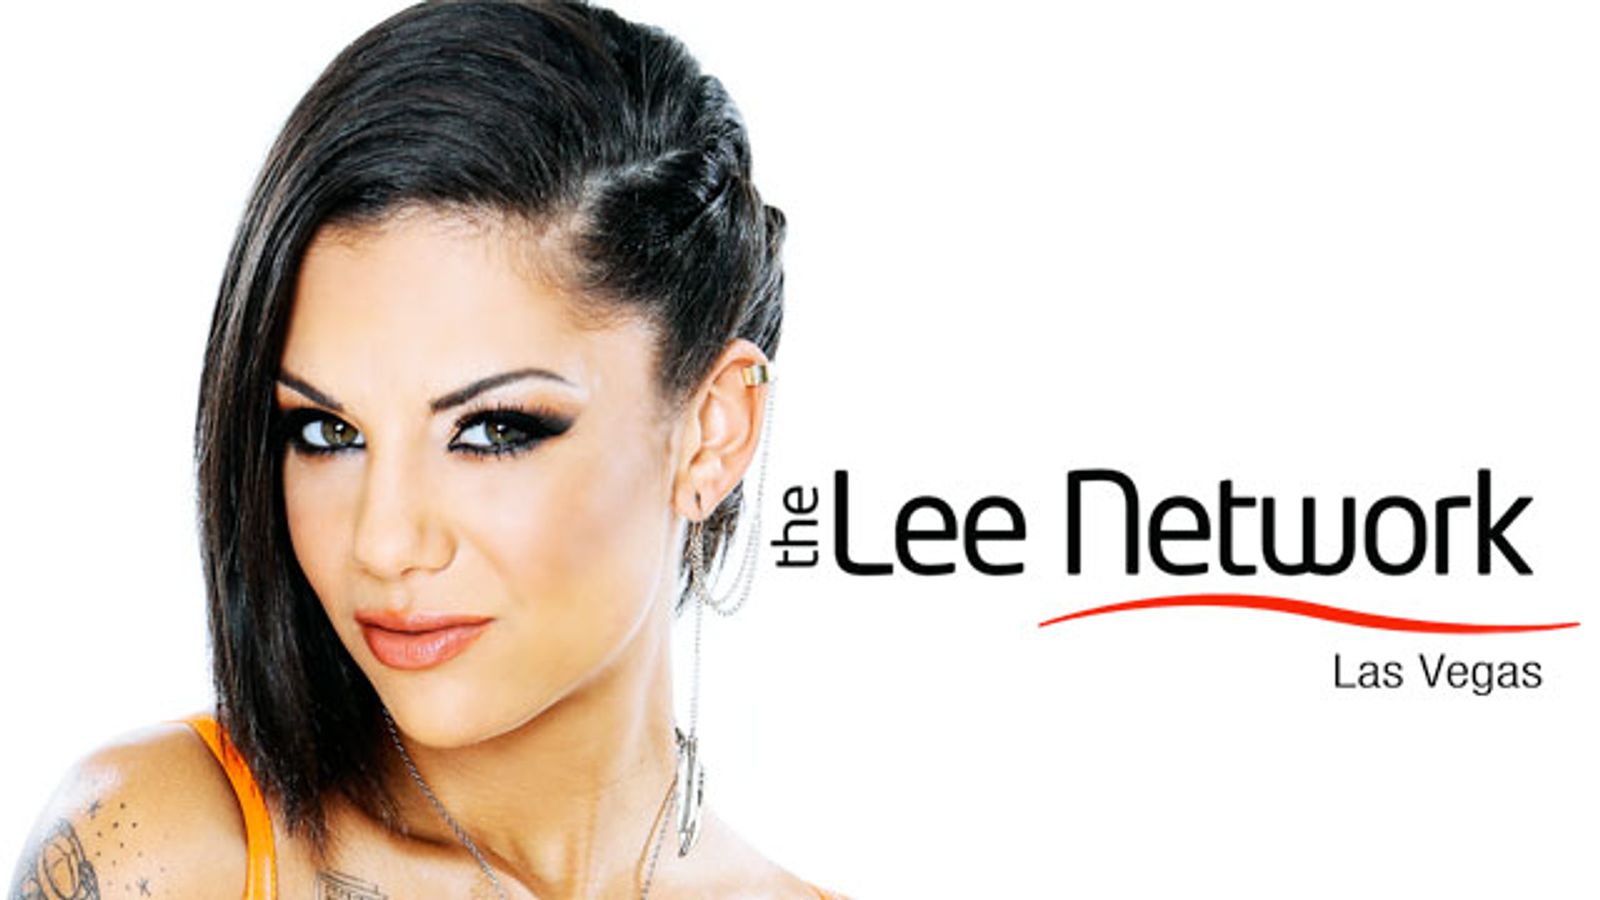 Bonnie Rotten Signs Feature Dancing Contract With Lee Network